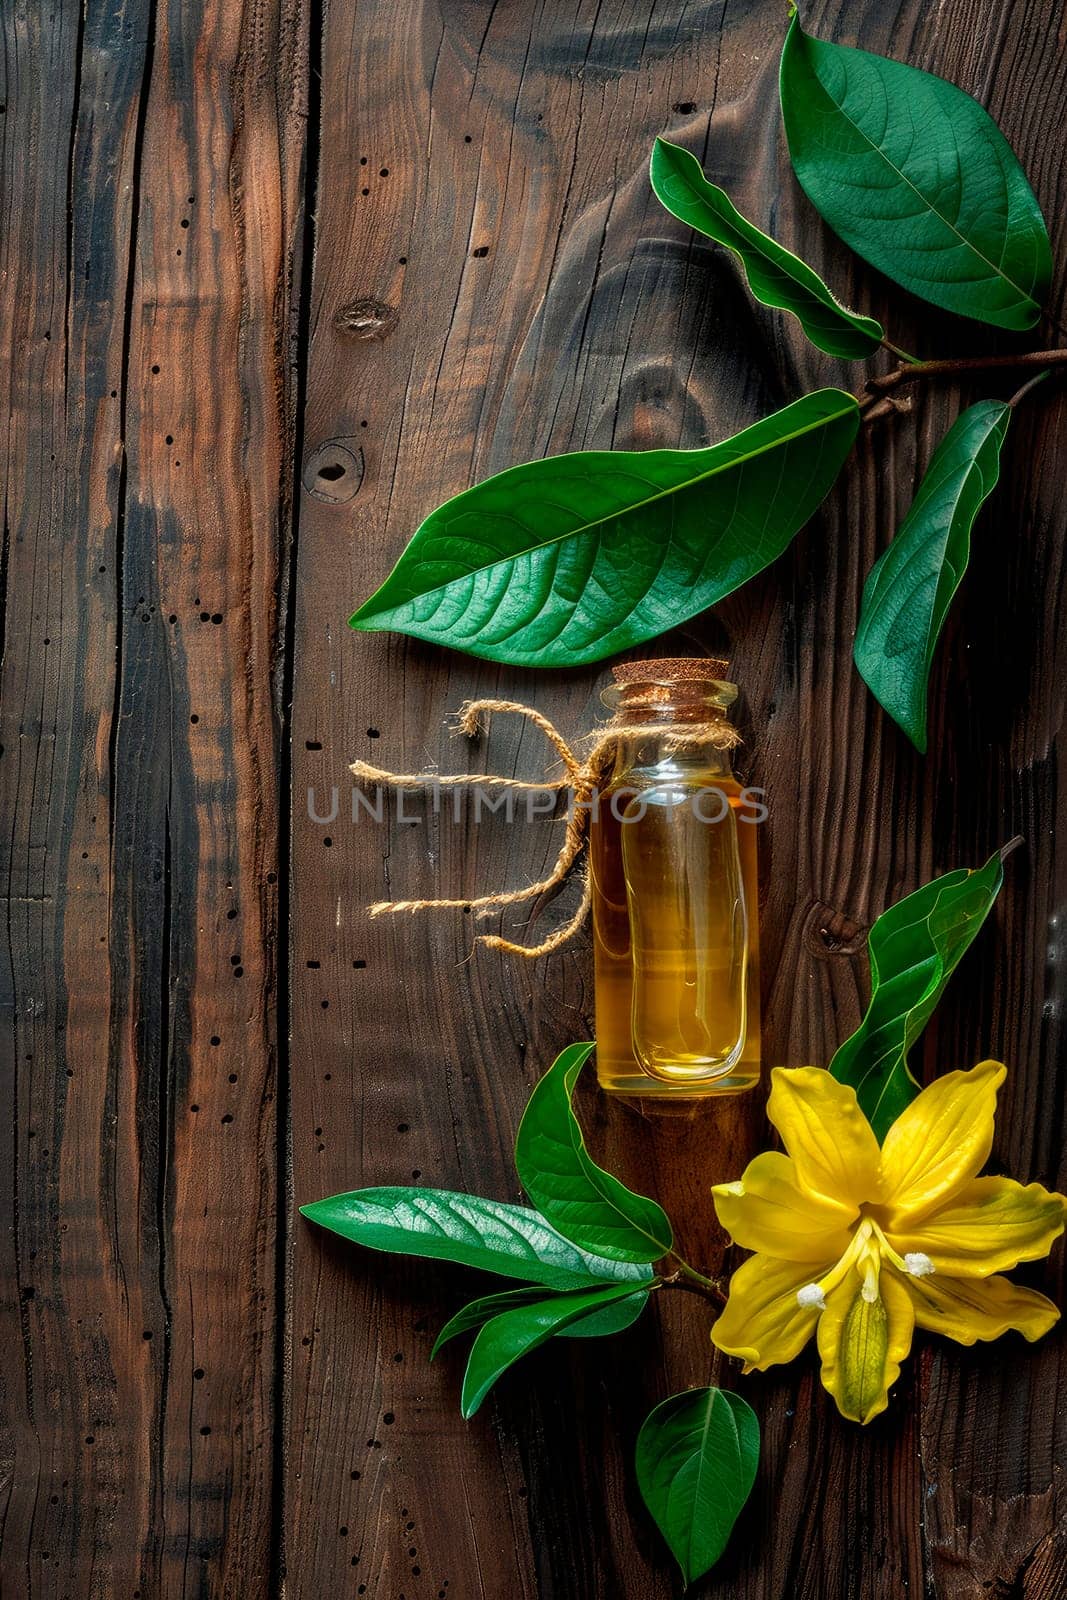 ylang-ylang essential oil in a bottle. selective focus. nature.